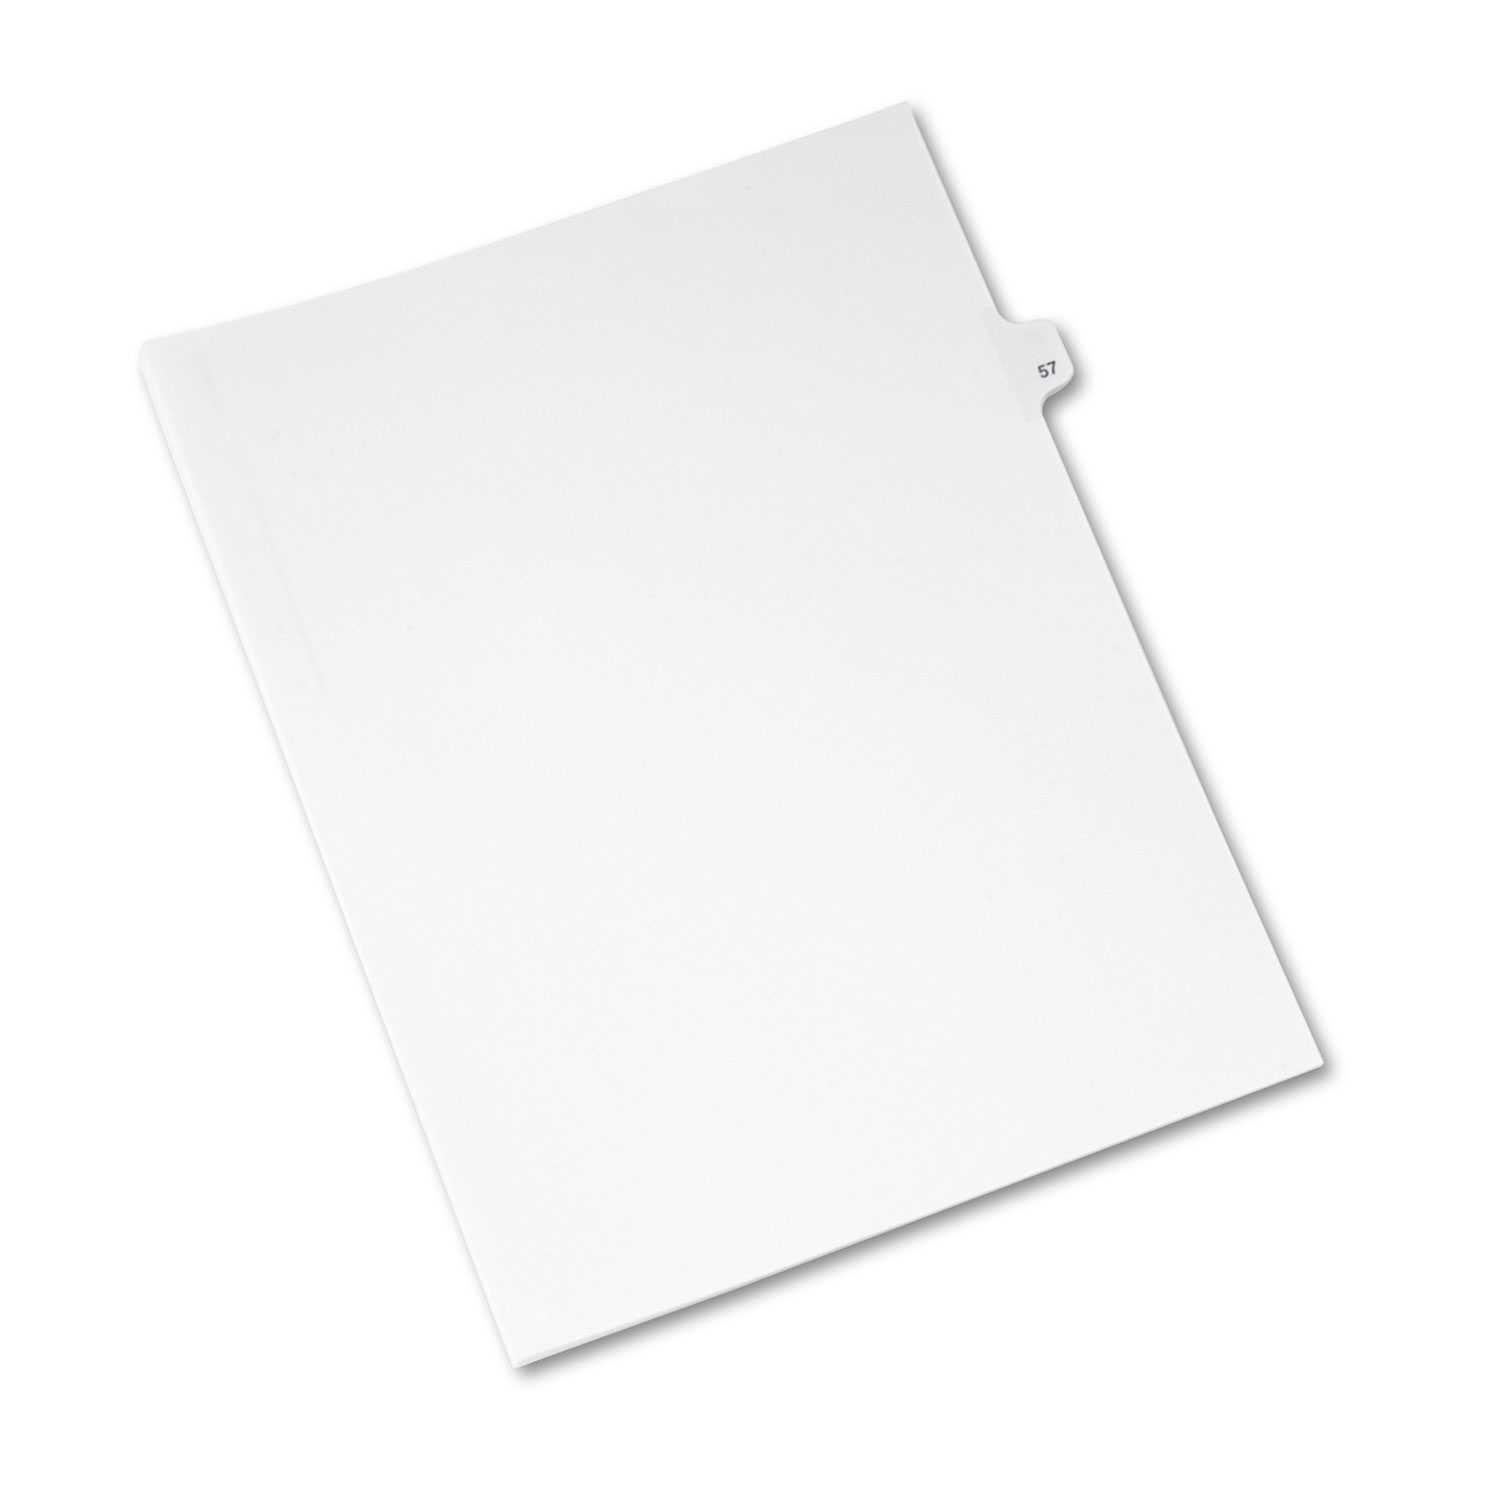 Avery-Style Legal Exhibit Side Tab Divider, Title: 57, Letter, White, 25/Pack